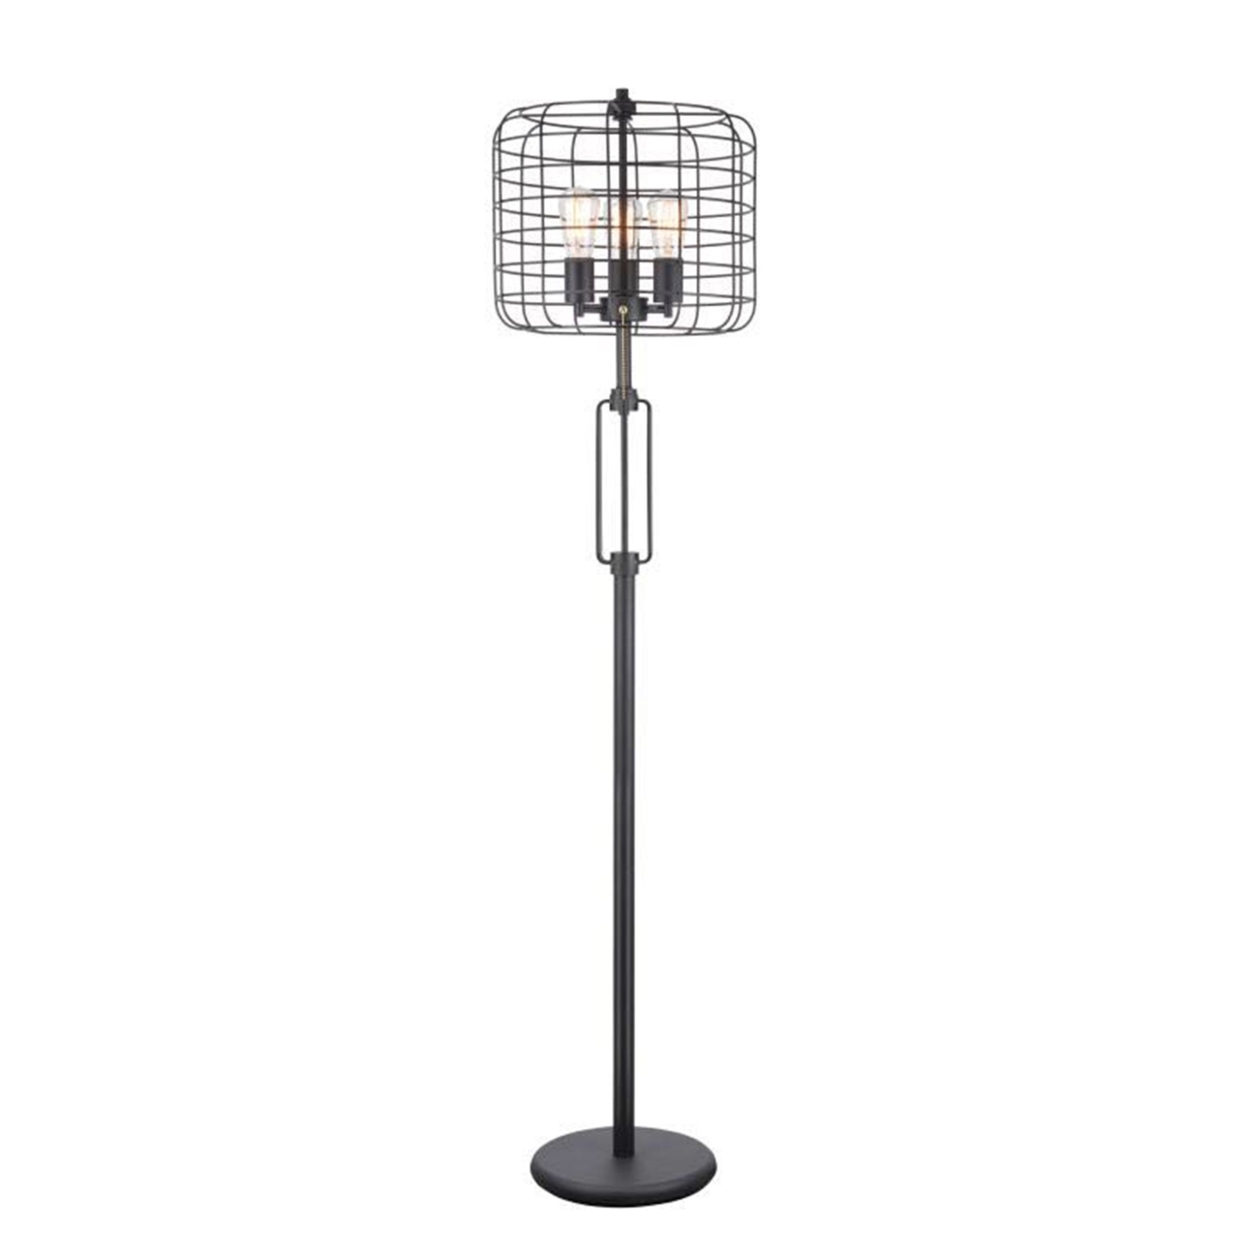 Cage Design Shade Metal Floor Lamp With Pull Chain Switch, Black- Saltoro Sherpi